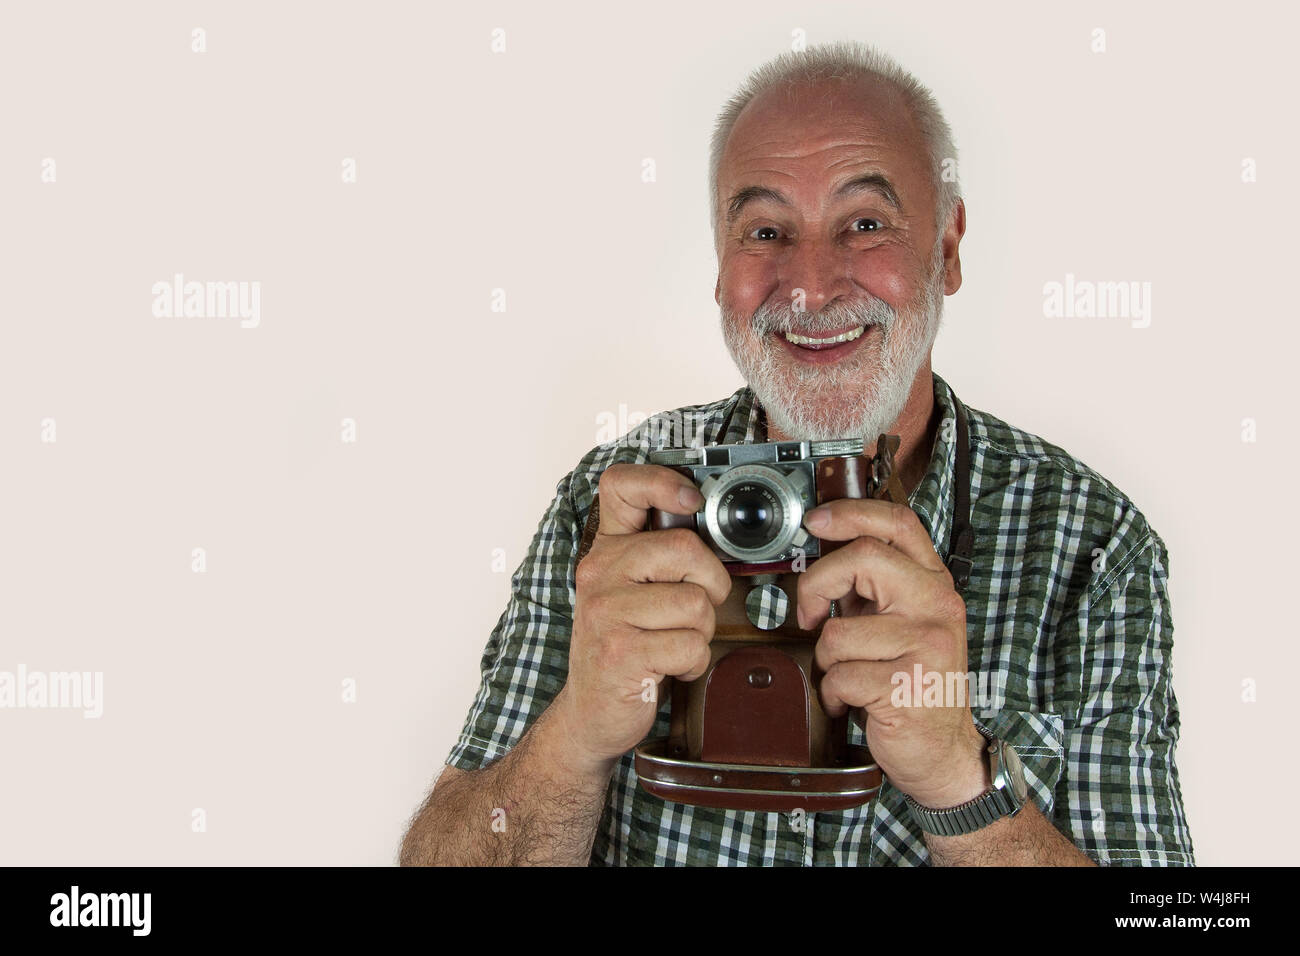 Two that match. Laughing old photographer with his old photo camera. Stock Photo